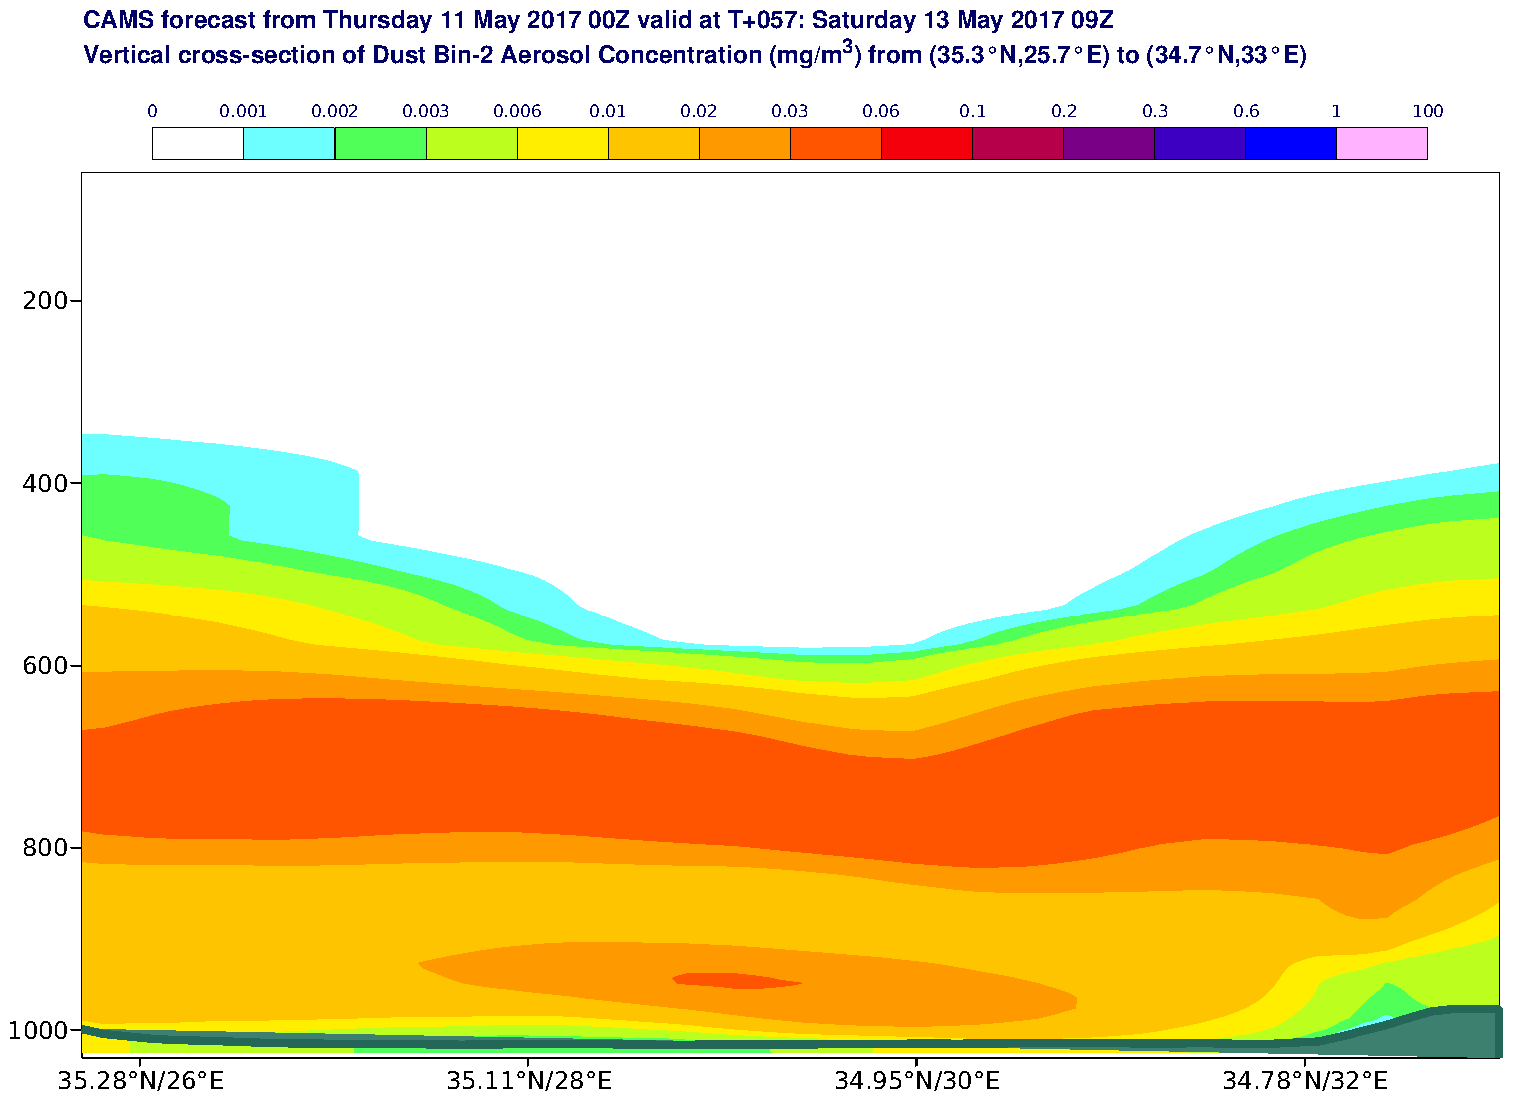 Vertical cross-section of Dust Bin-2 Aerosol Concentration (mg/m3) valid at T57 - 2017-05-13 09:00